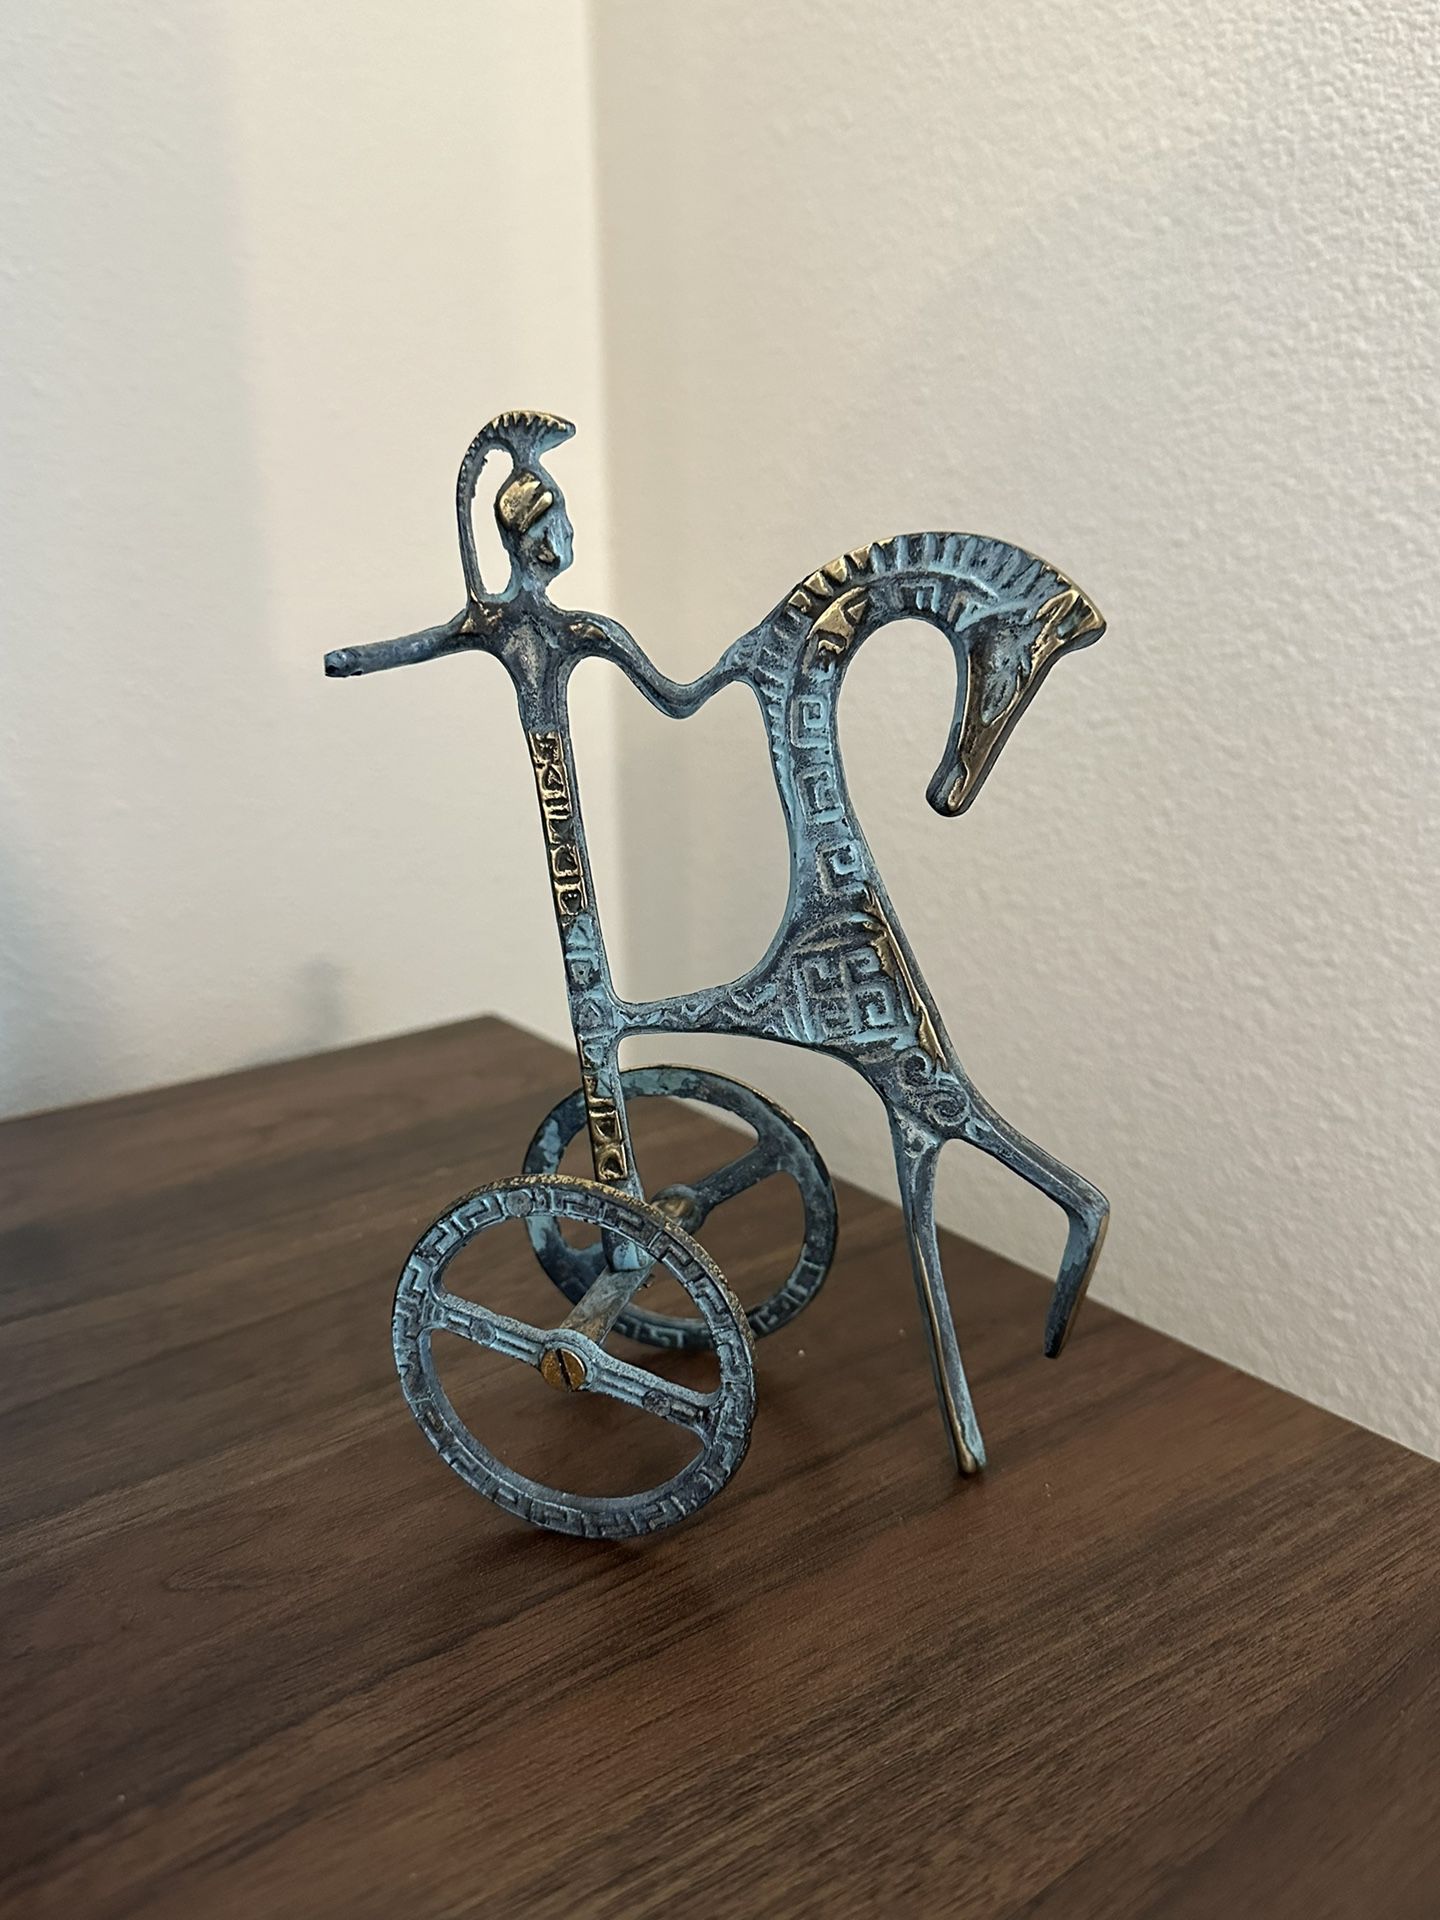 Vintage Etruscan horse and chariot statue